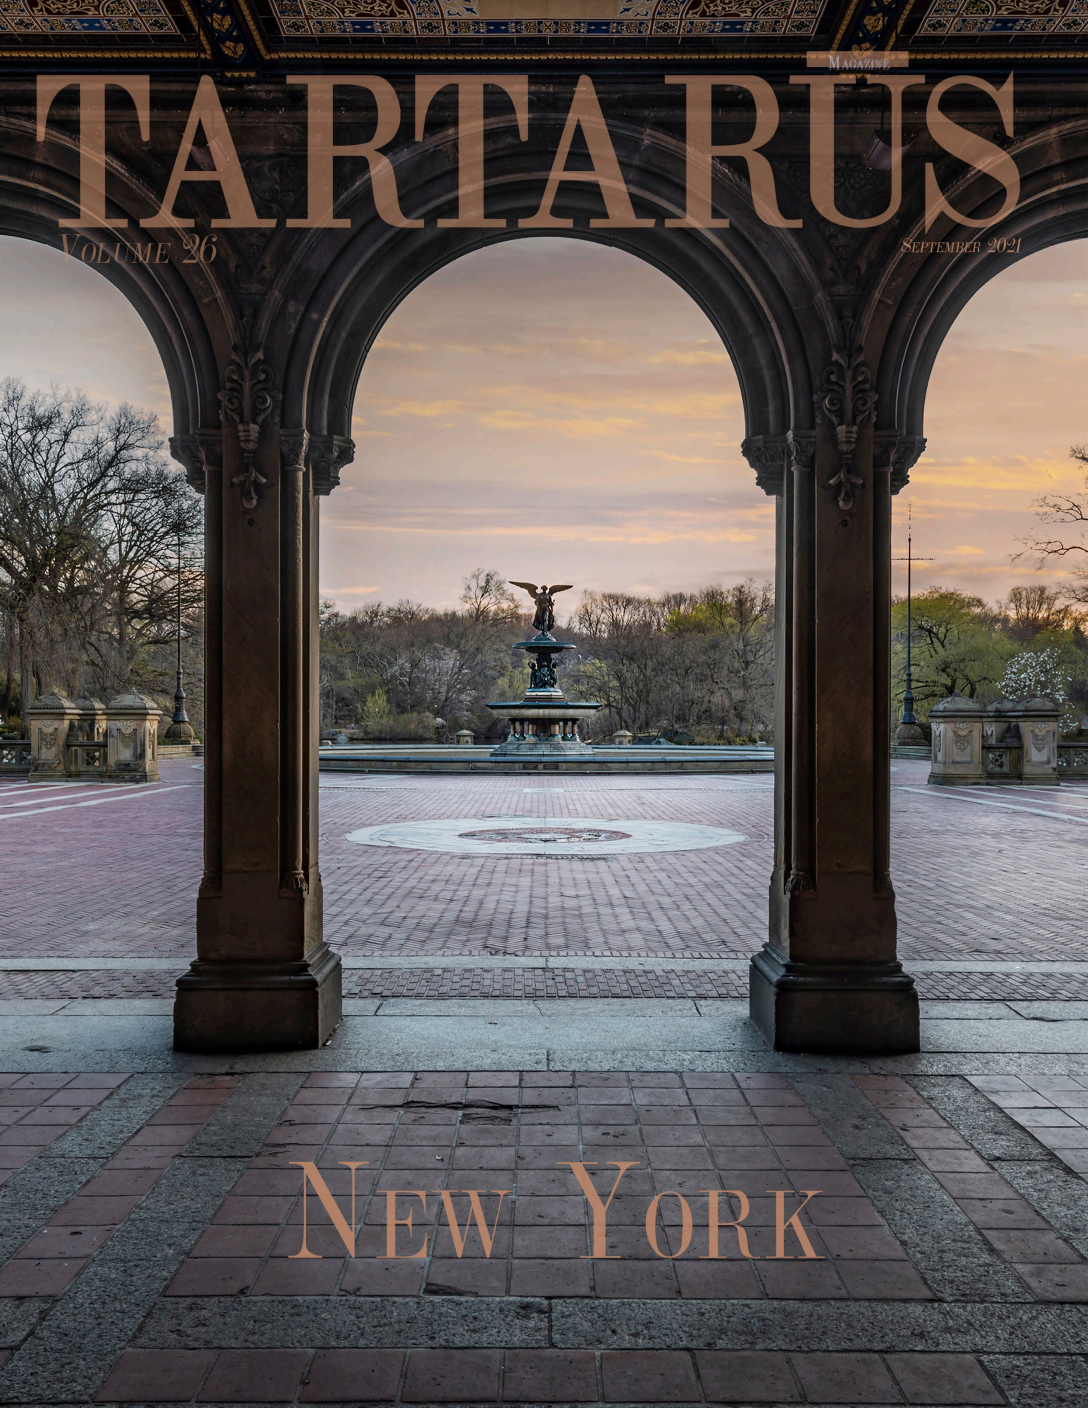 Tartarus+Magazine+-+September,+2021+'The+New+York+Issue'+featuring+Places+Without+Faces+Bethesda+Fountain+by+photographer+Andrew+Werner.png